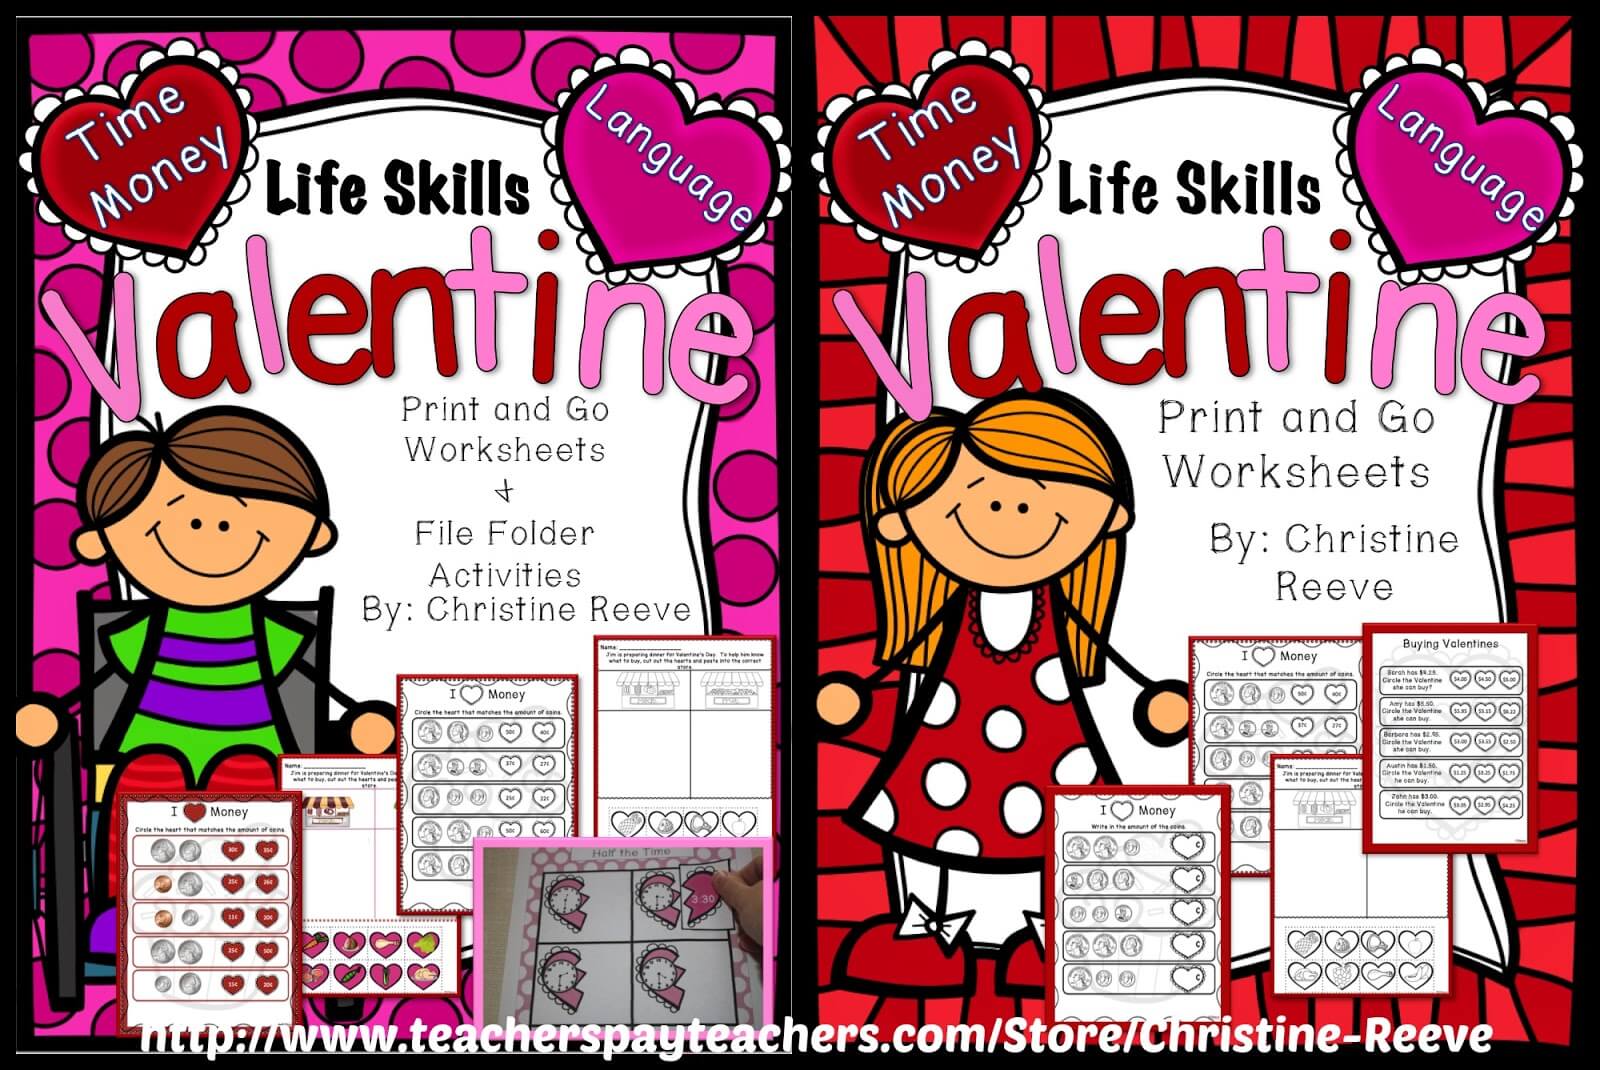 Valentine Craft for Kids to Make Their Parents - Fun-A-Day!